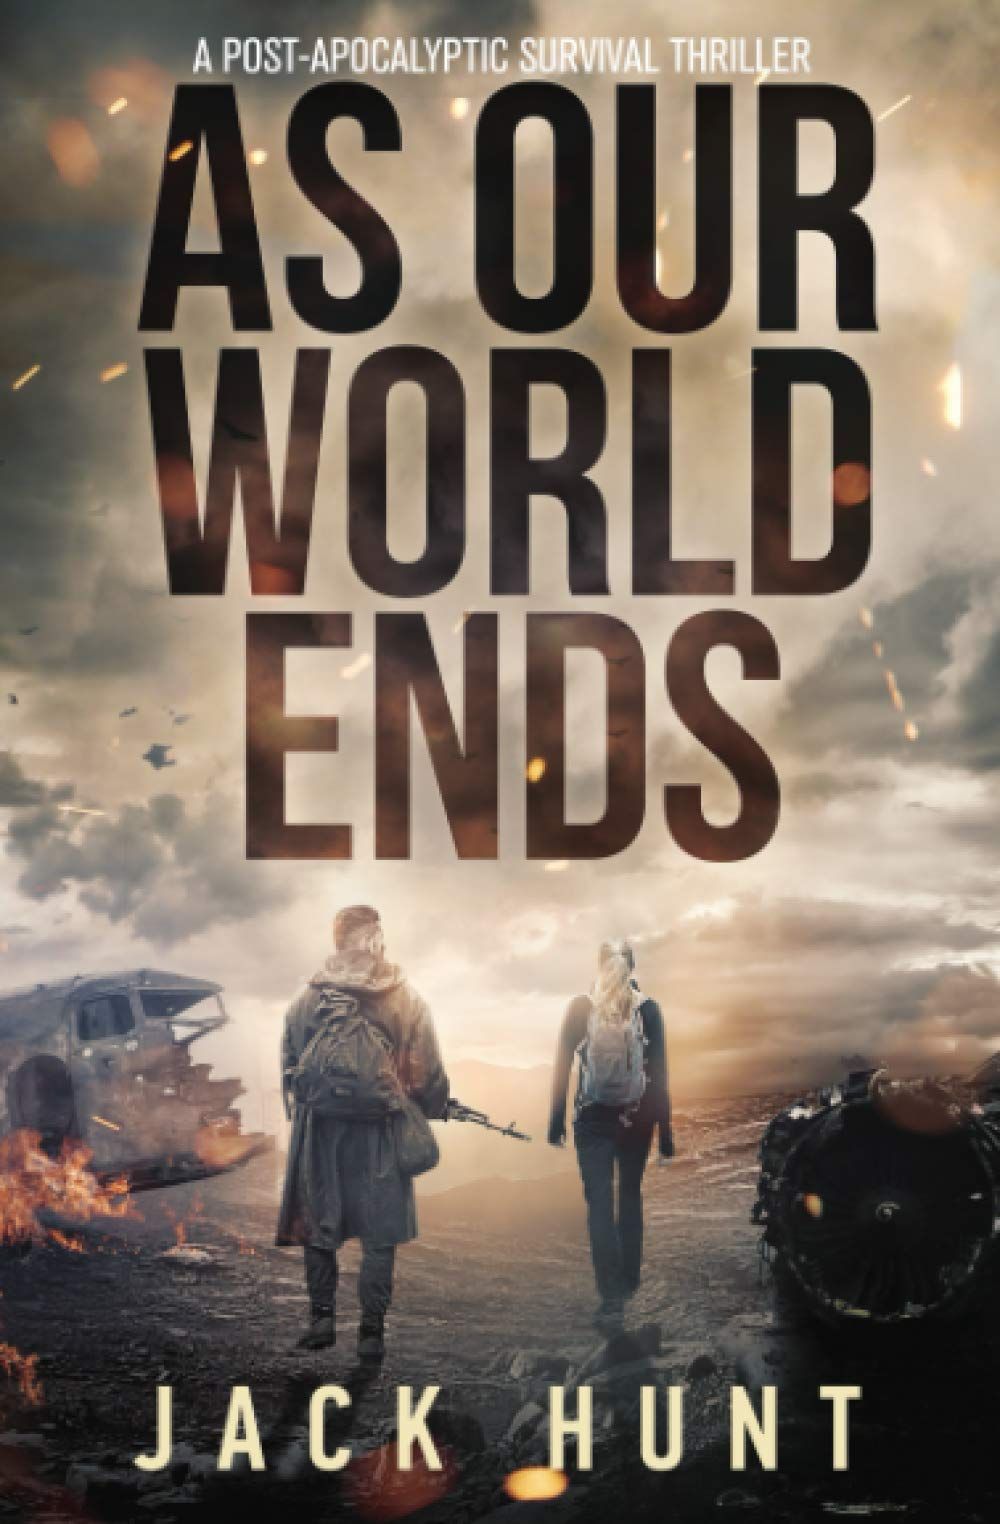 15 Of The Best Post Apocalyptic Books In 2020 - 53